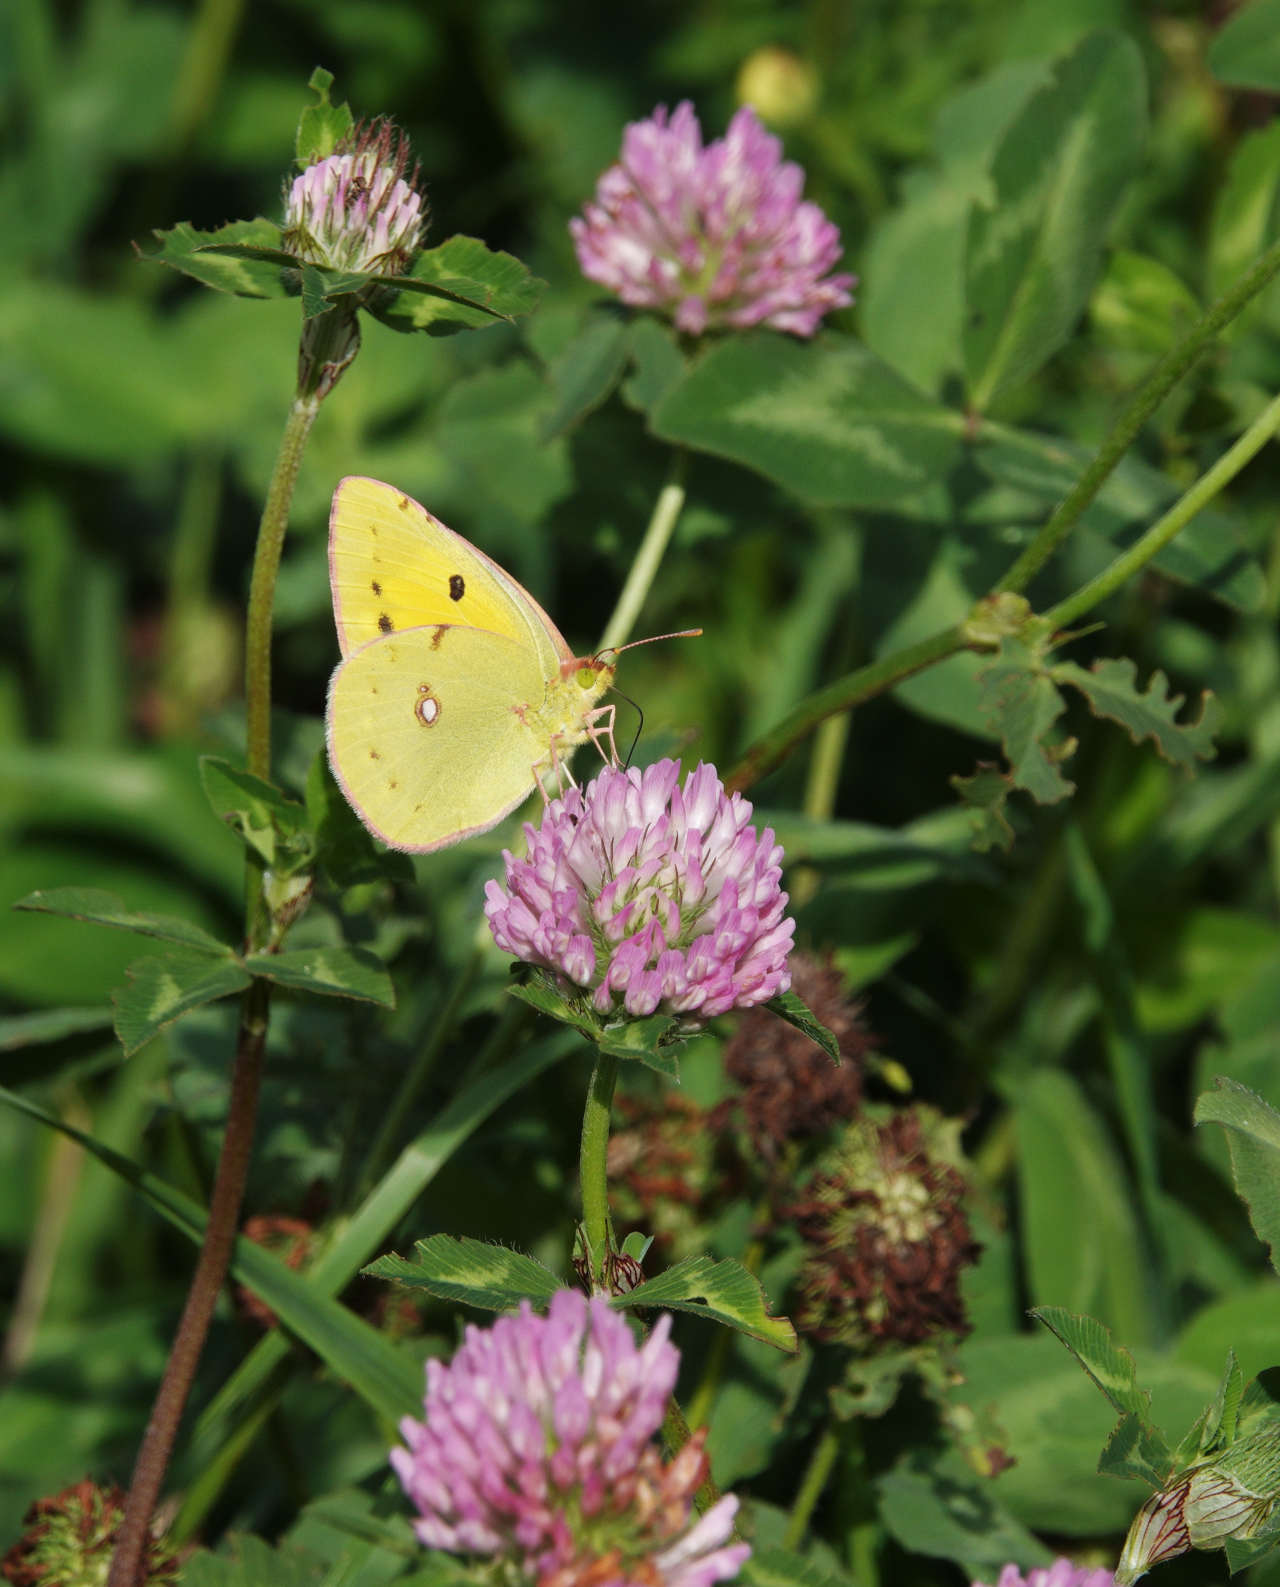 Masses of Clouded Yellows emerge in a nearby clover field during September.